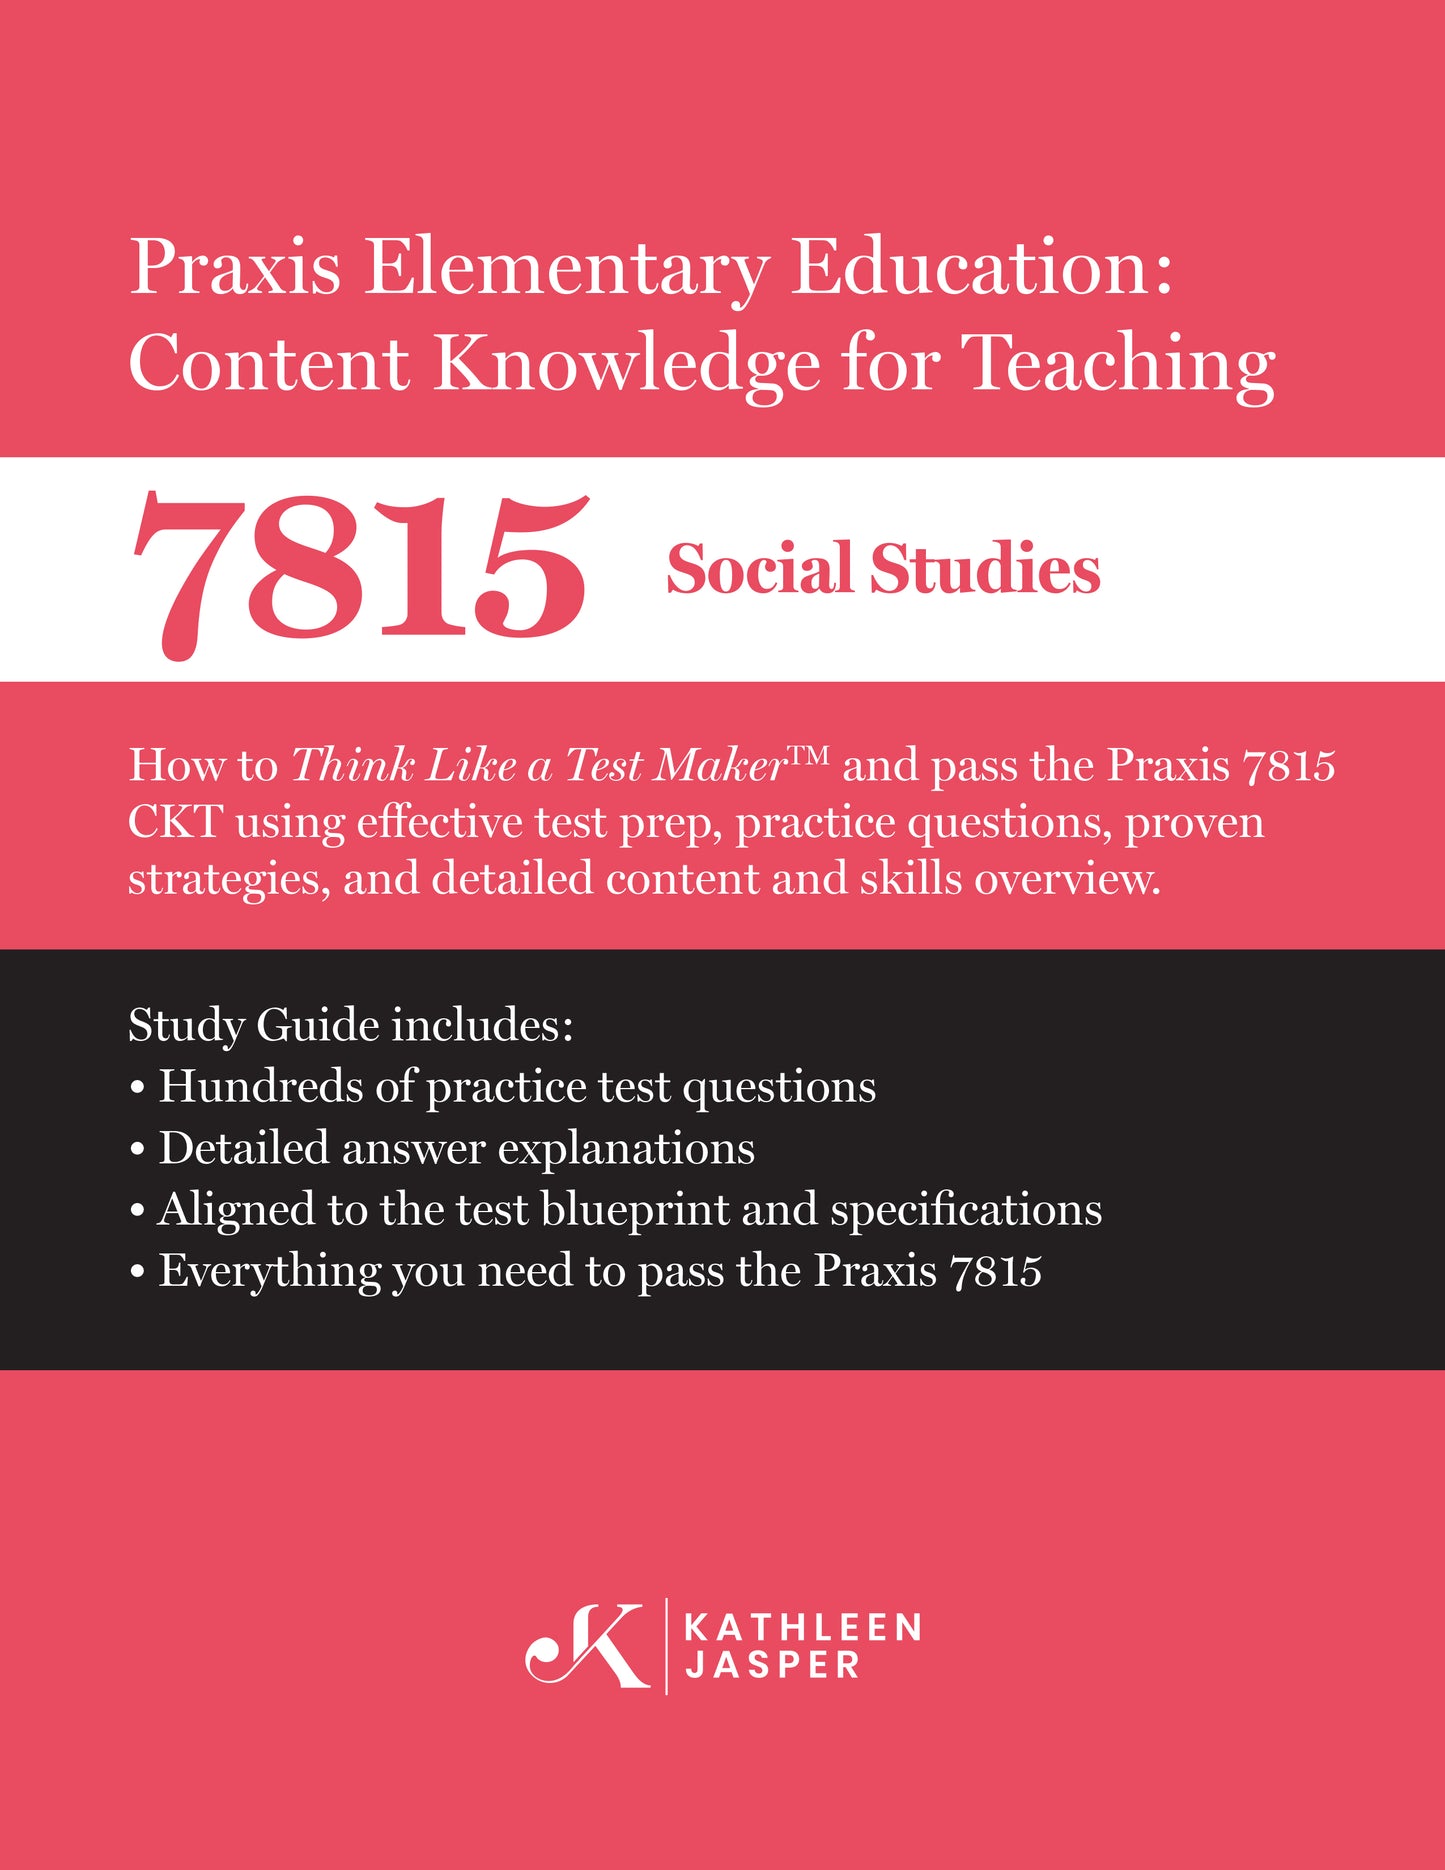 Praxis Elementary Education Content Knowledge for Teaching 7815 Social Studies